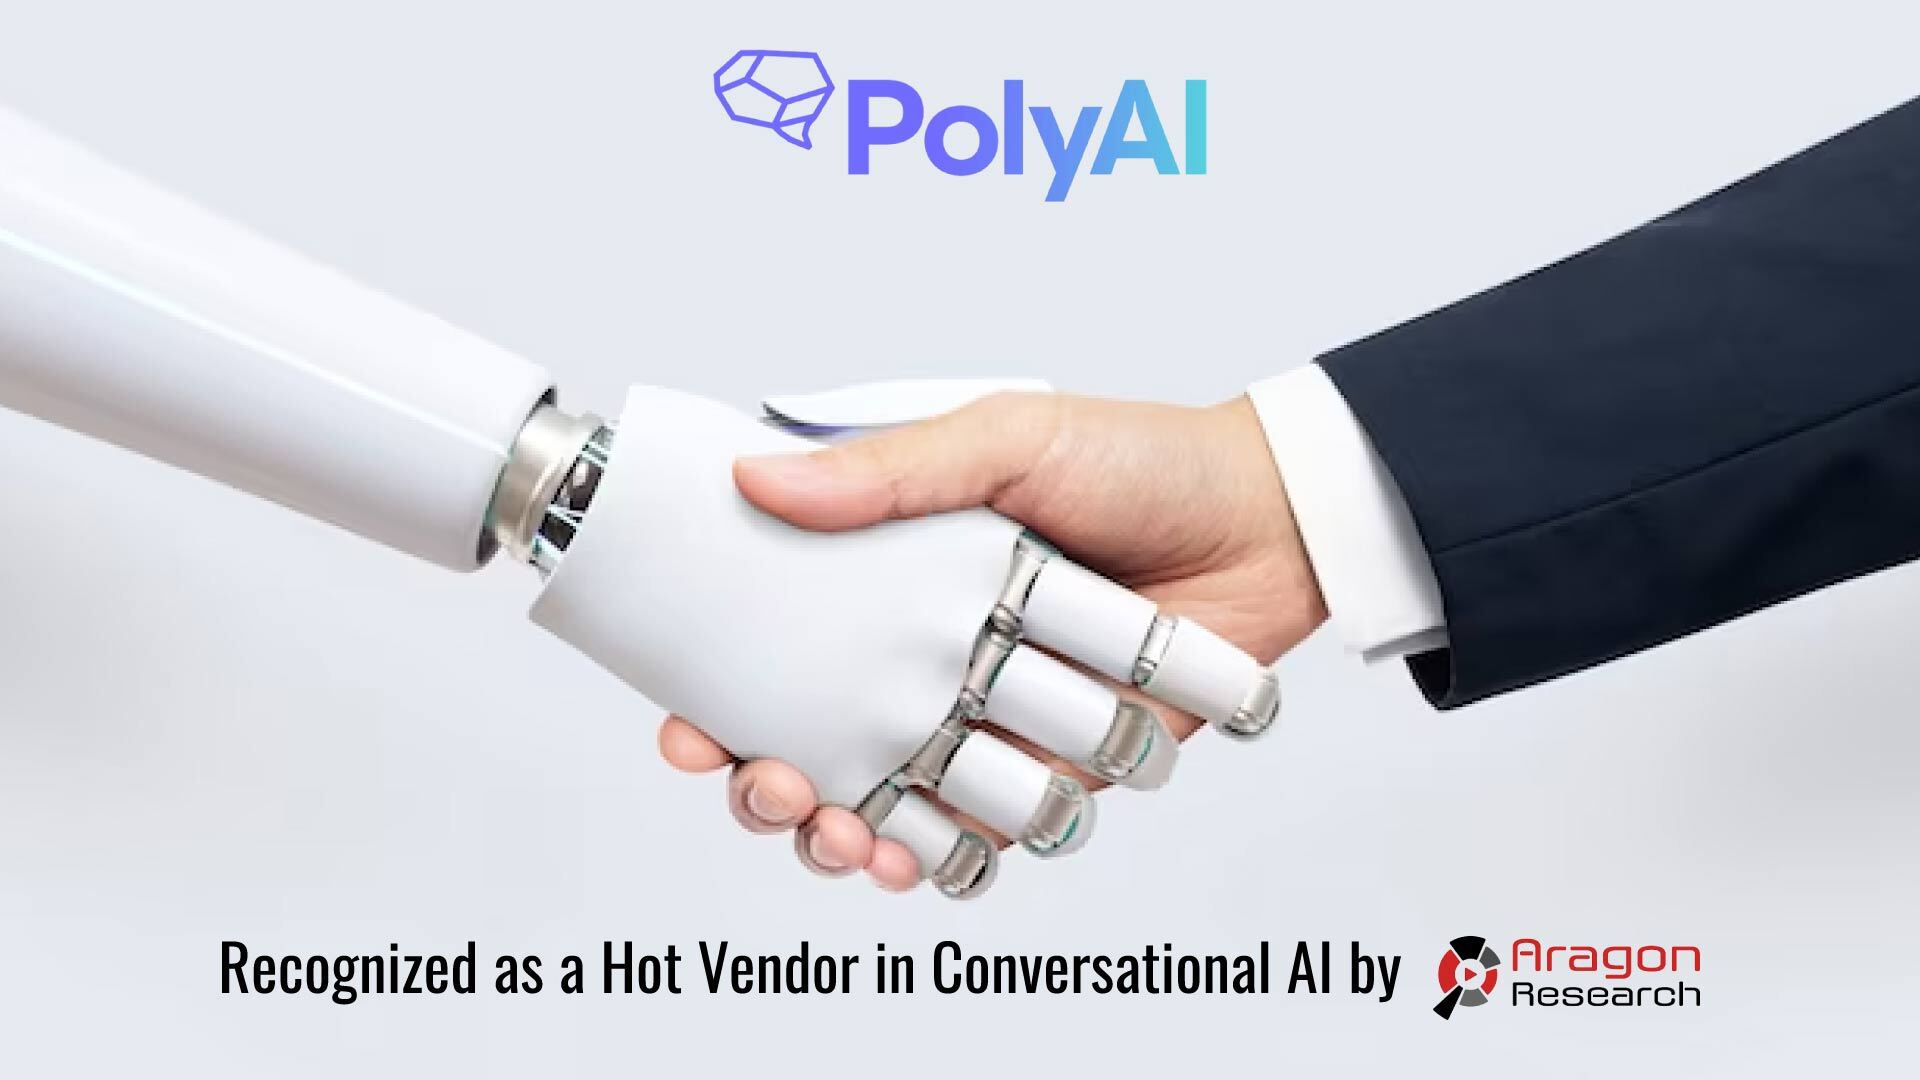 PolyAI Recognized as a Hot Vendor in Conversational AI by Aragon Research; AI 100 Company by CB Insights